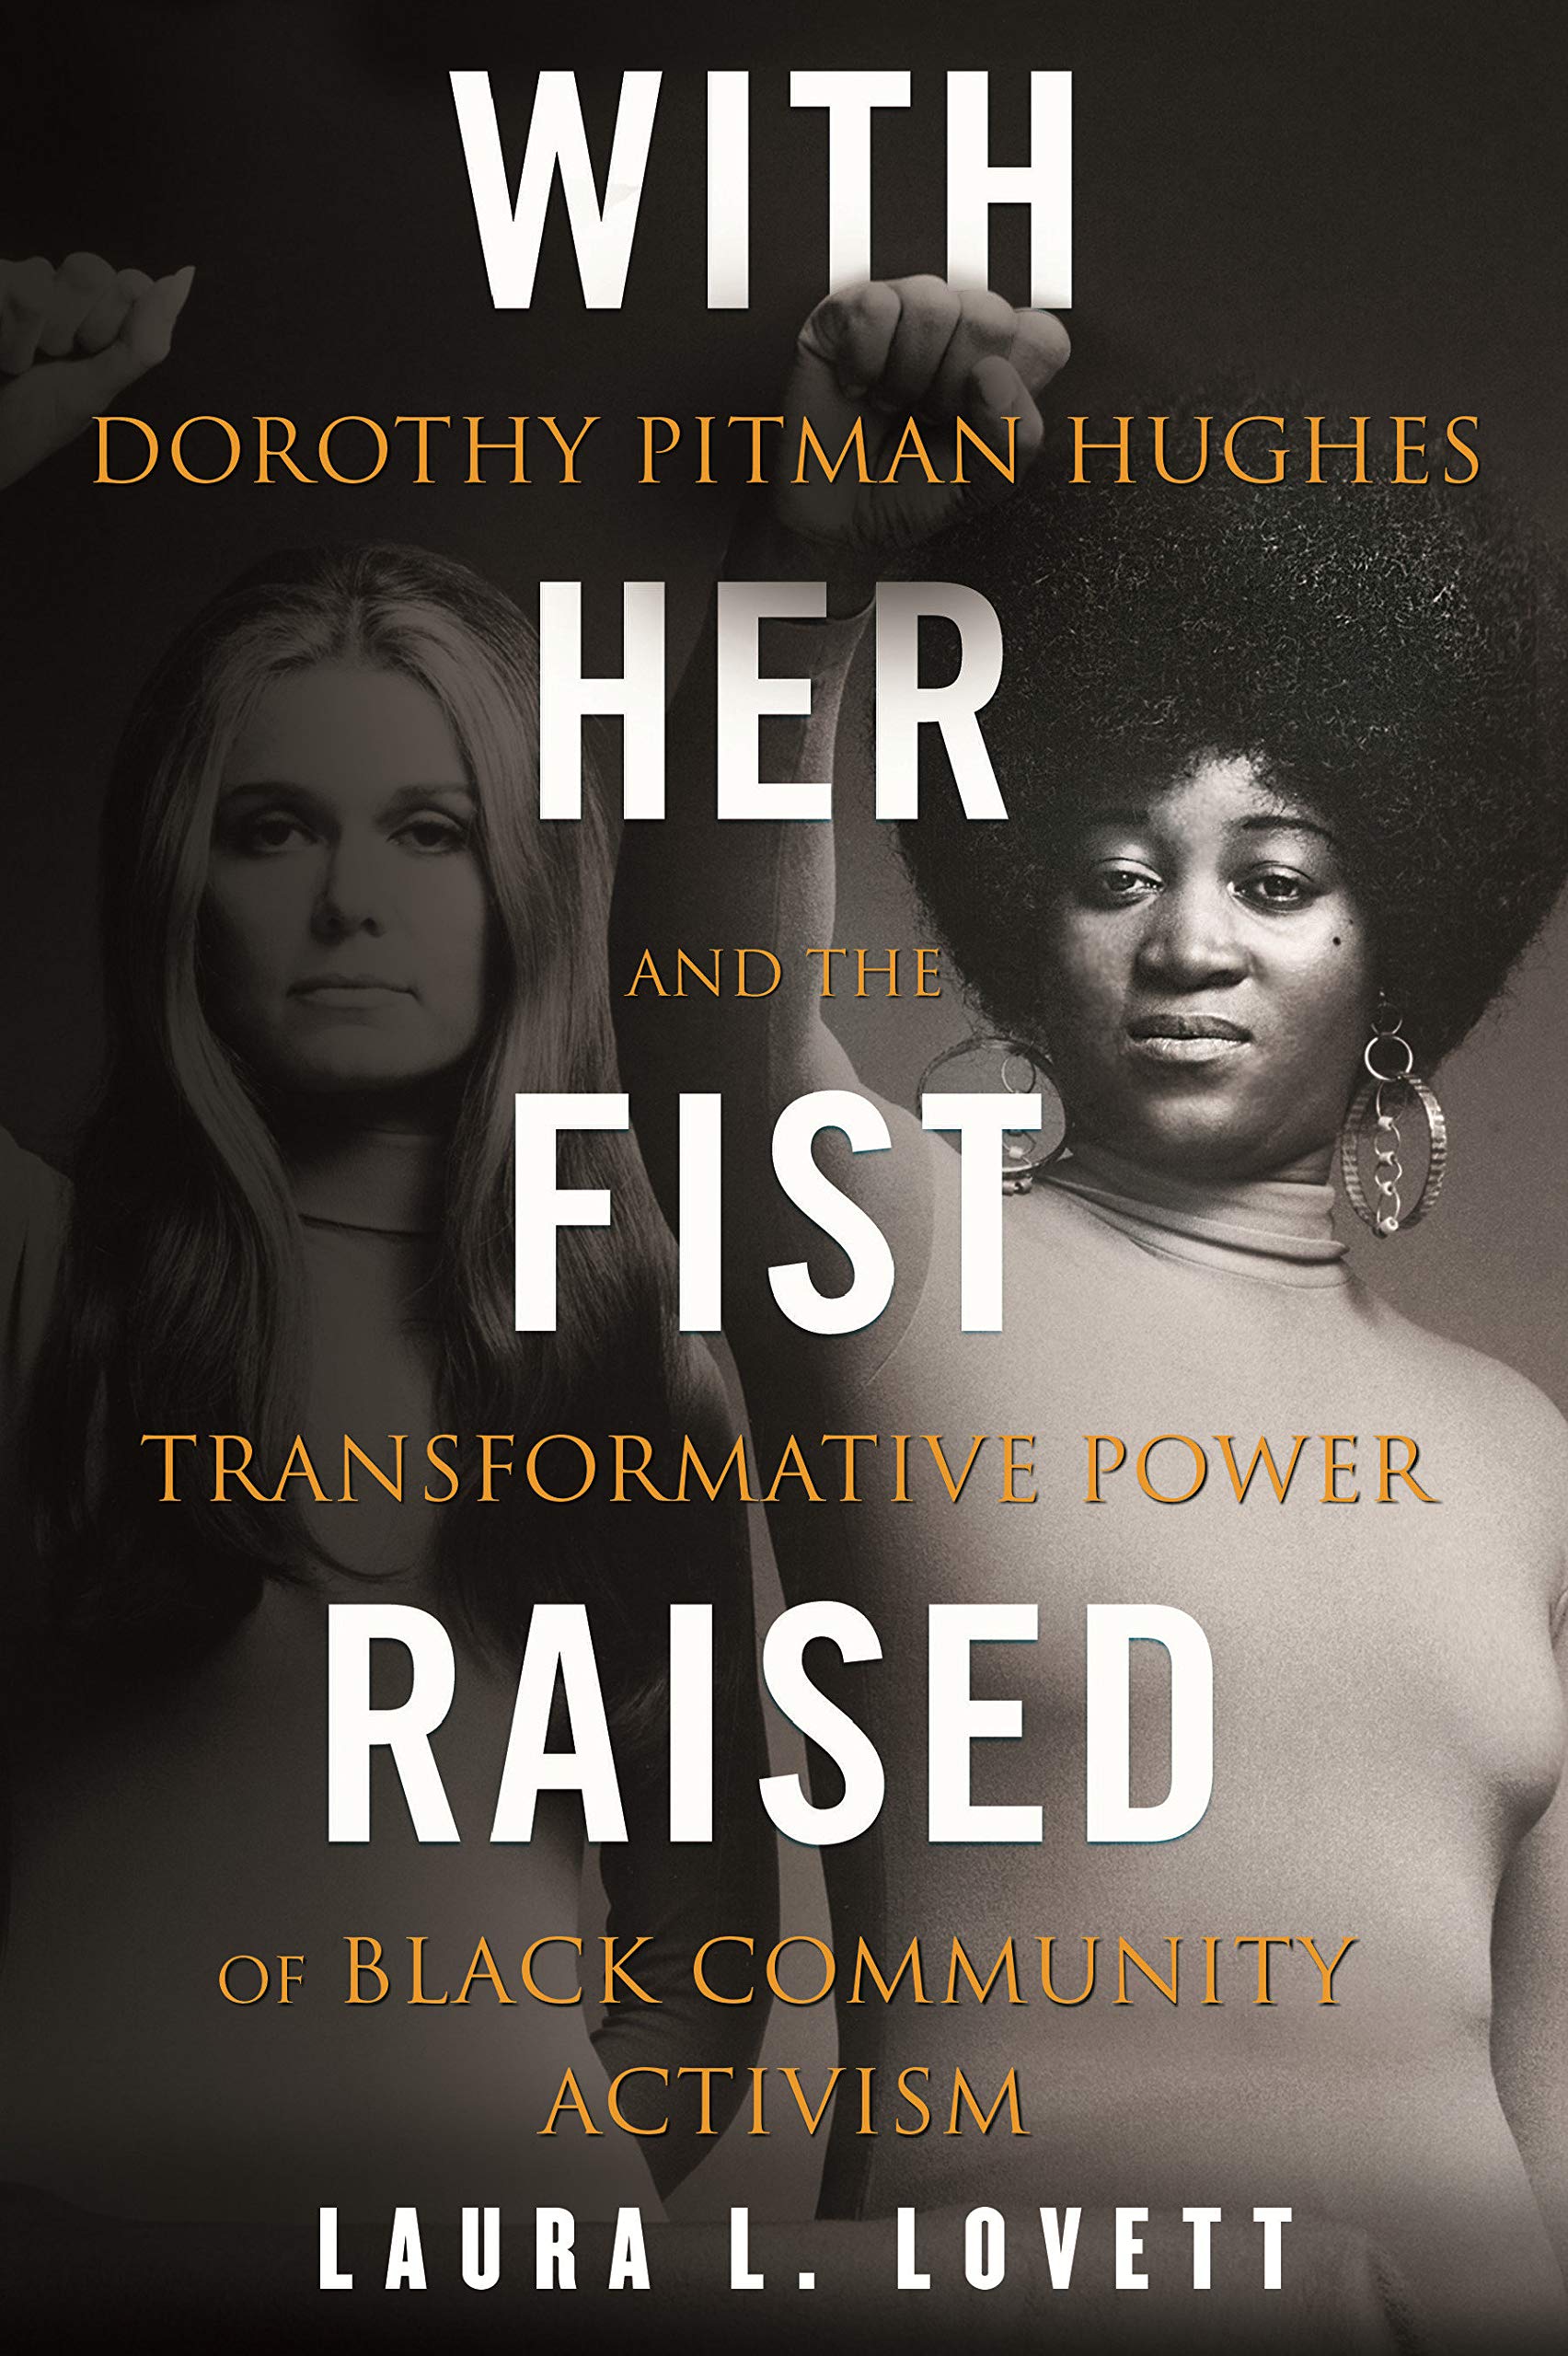 With Her Fist Raised: Dorothy Pitman Hughes and the Transformative Power of Black Community Activism Hardcover by Laura L. Lovett